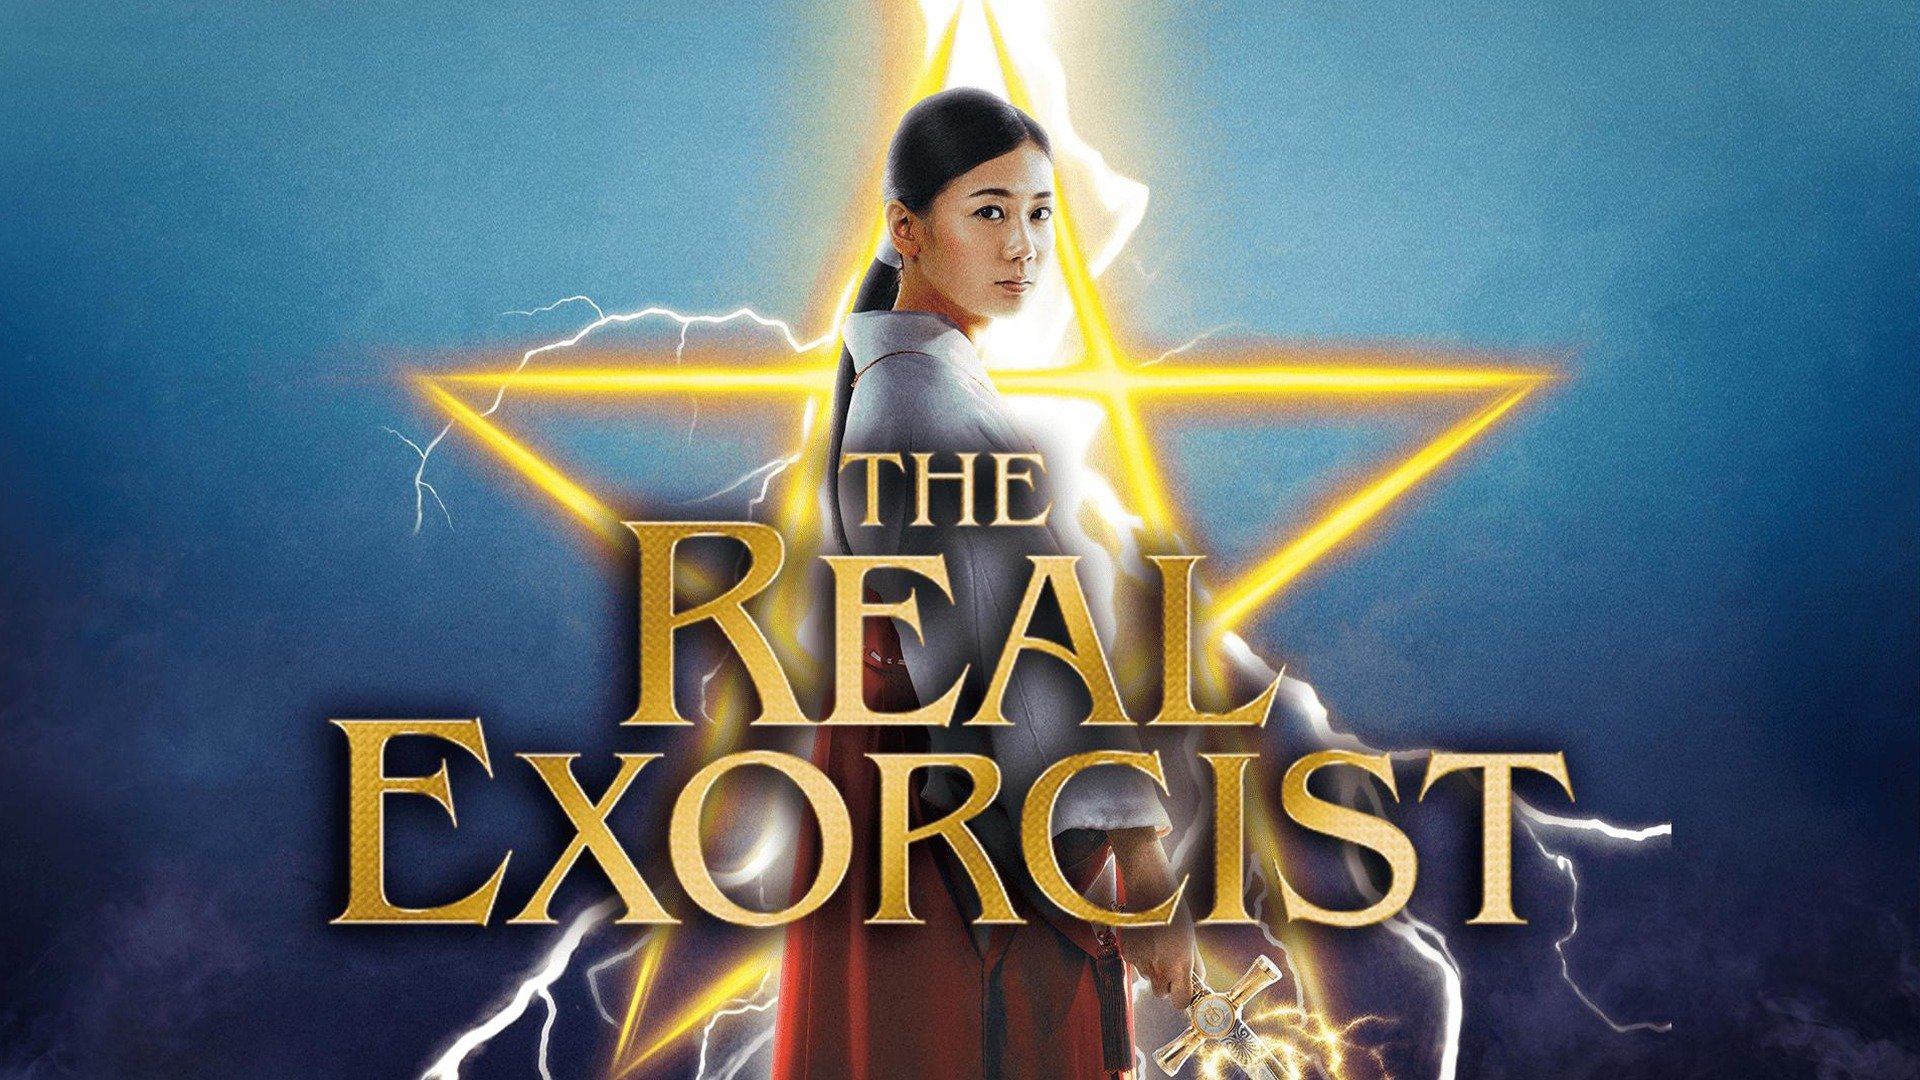 The Real Exorcist Trailer 1 Trailers & Videos Rotten Tomatoes